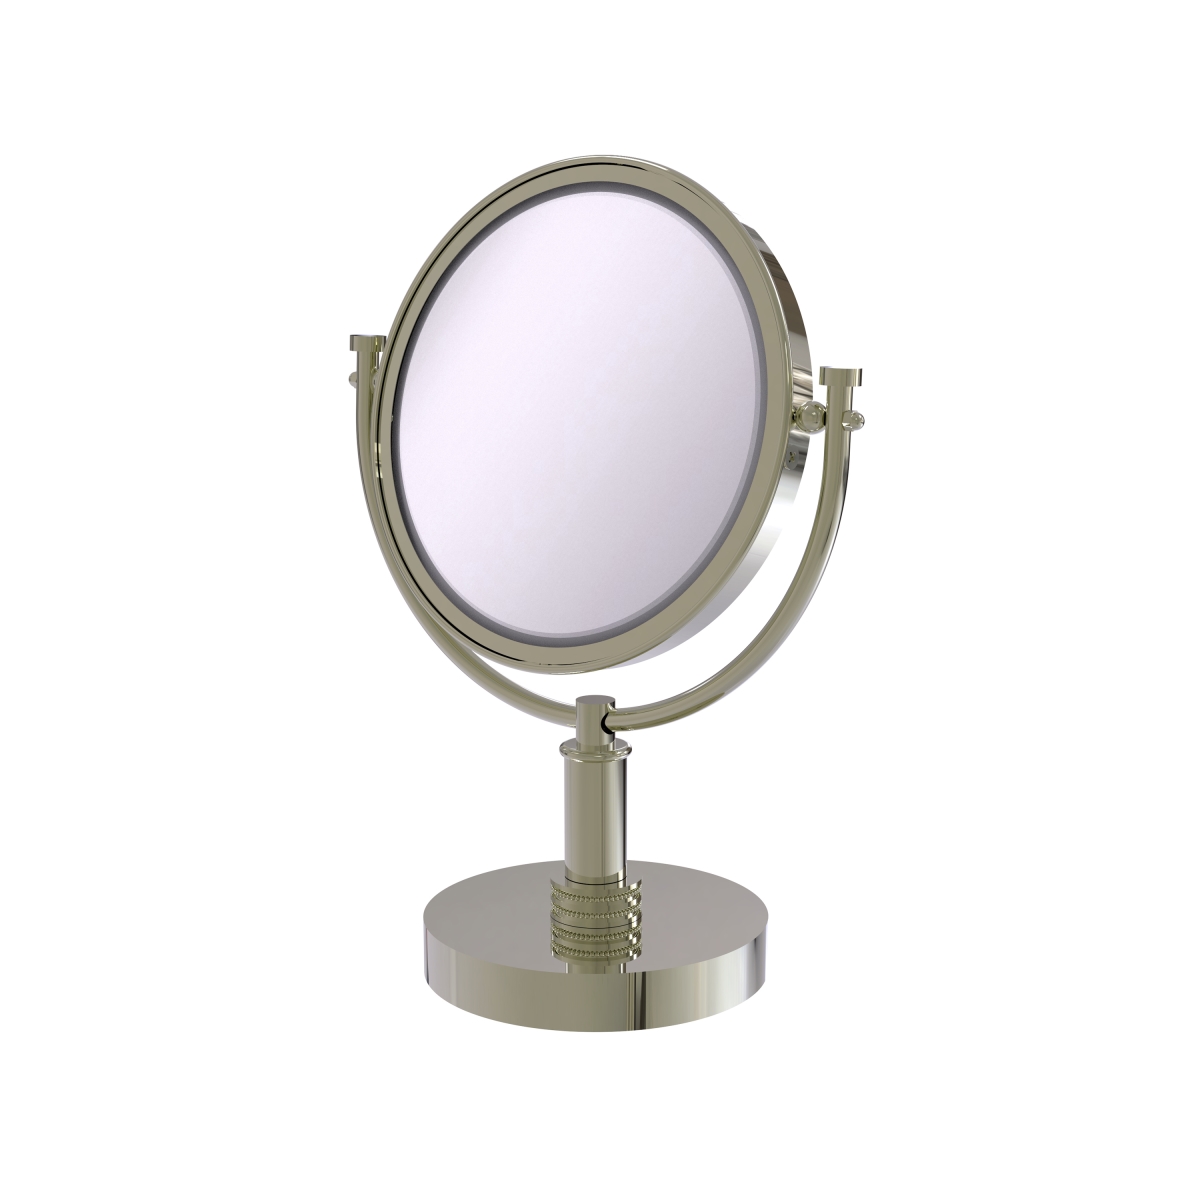 DM-4D-2X-PNI 8 in. Vanity Top Make-Up Mirror 2X Magnification, Polished Nickel - 15 x 8 x 8 in -  Allied Brass, DM-4D/2X-PNI